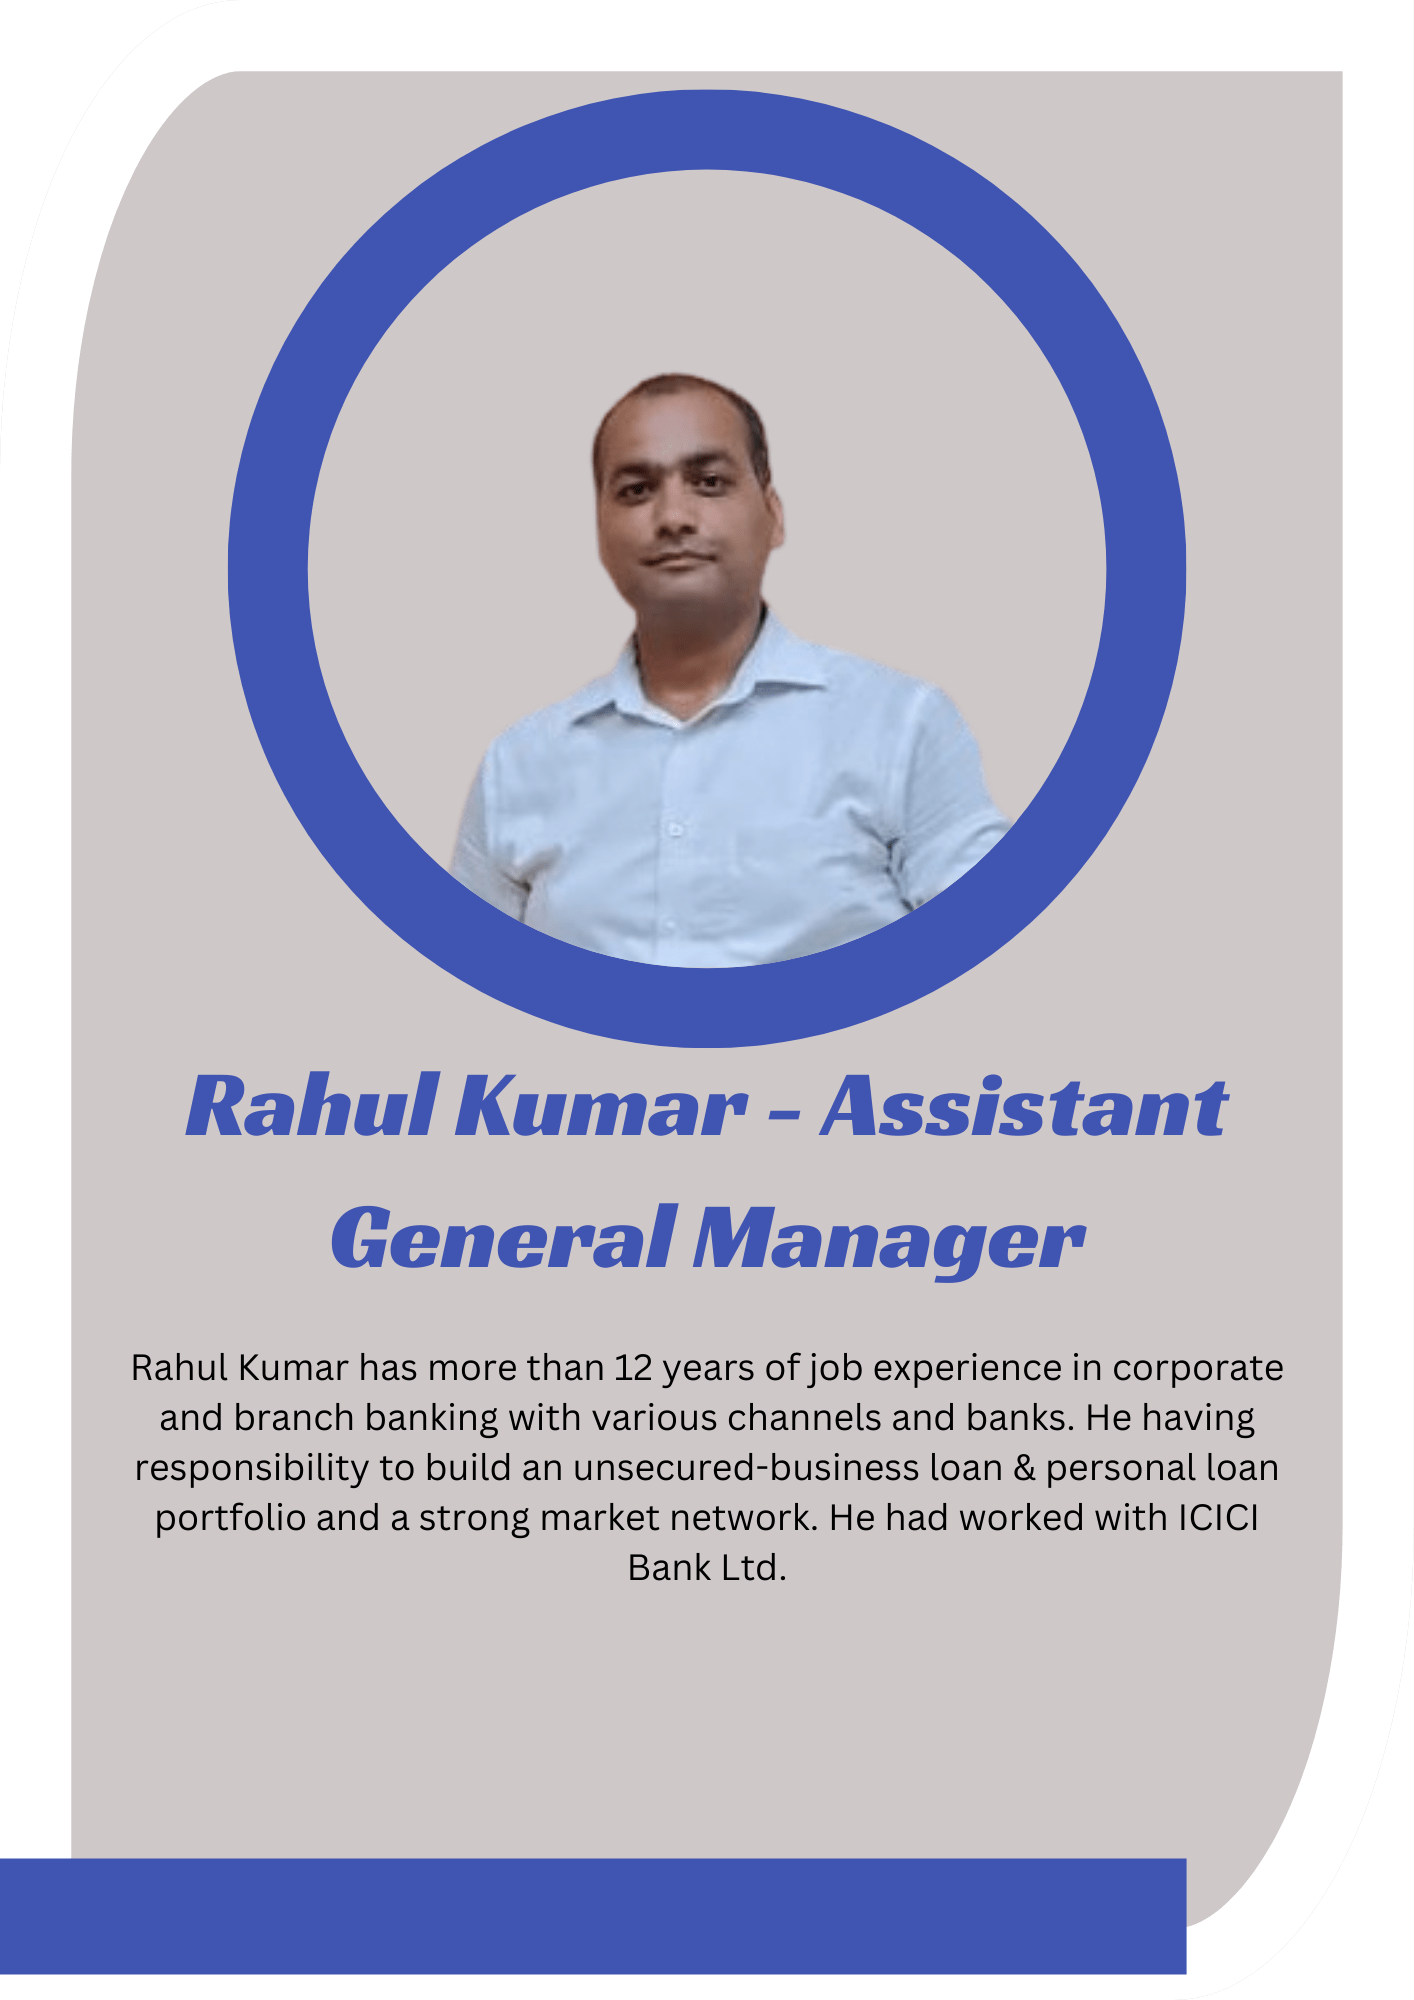 Rahul kumar - Assistant General Manager /about us